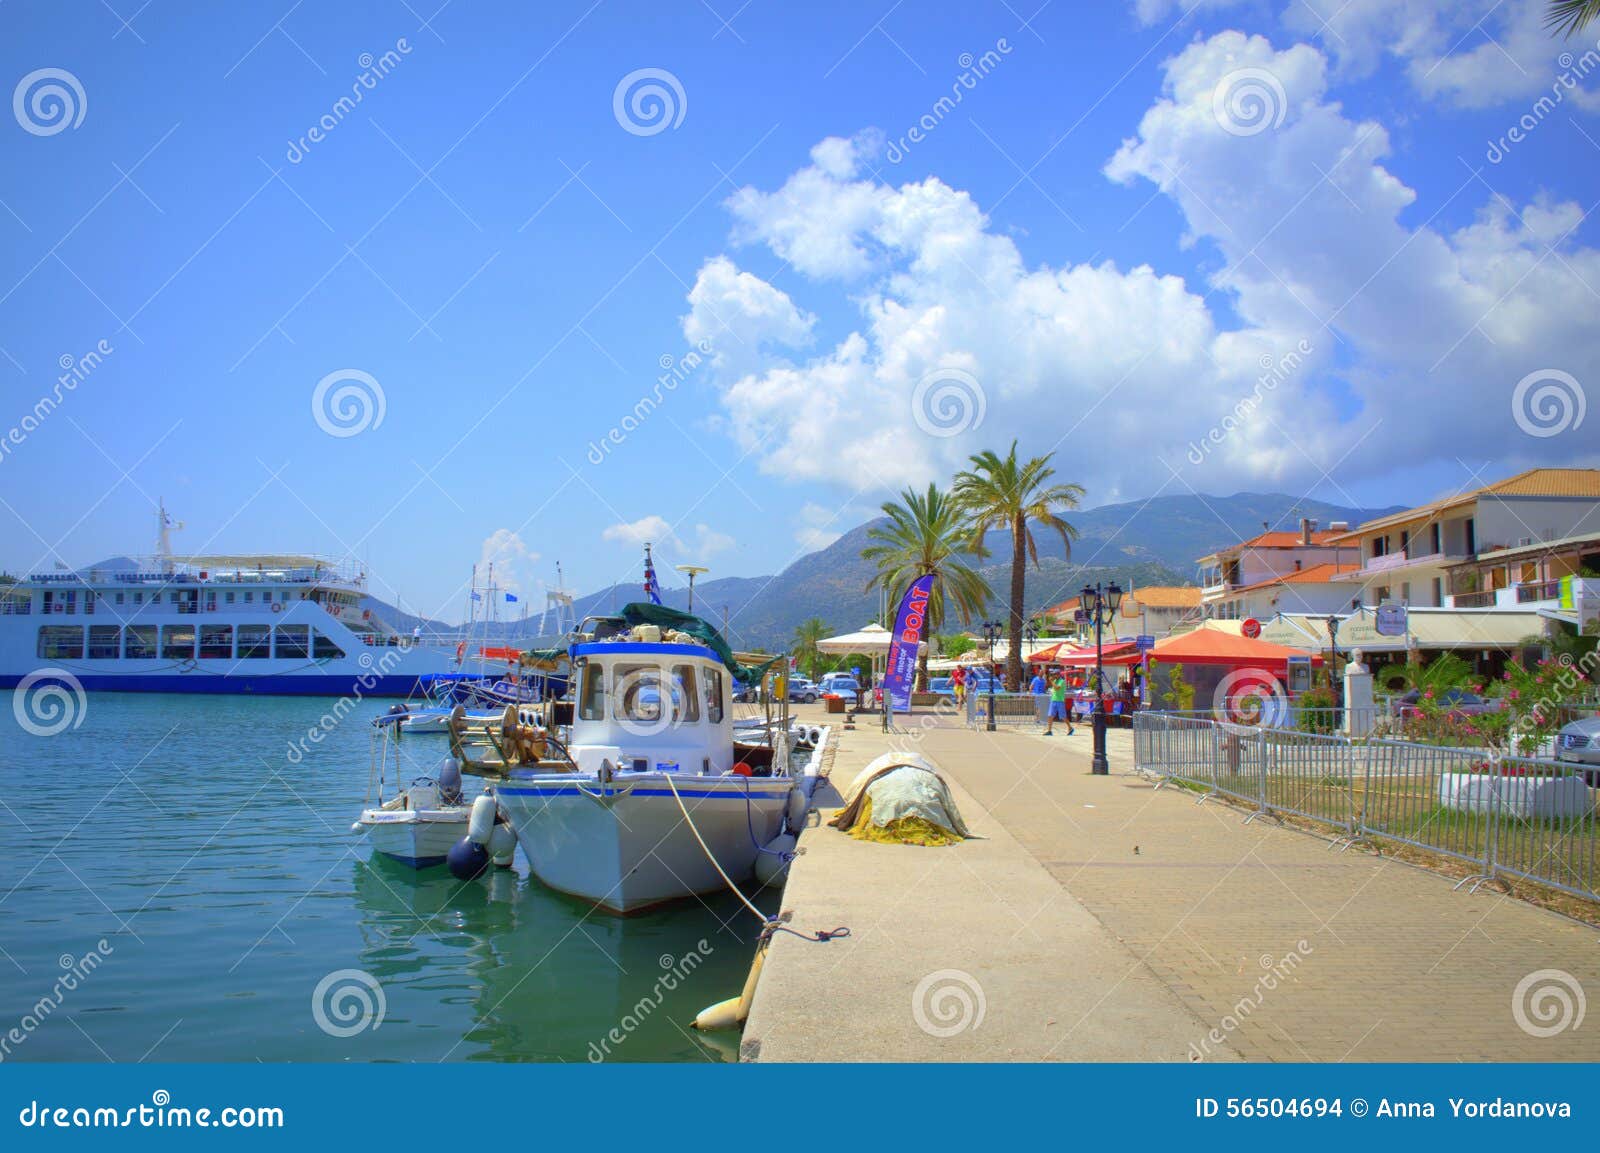 Beautiful Waterfront View,Greece Editorial Stock Image - Image of ...